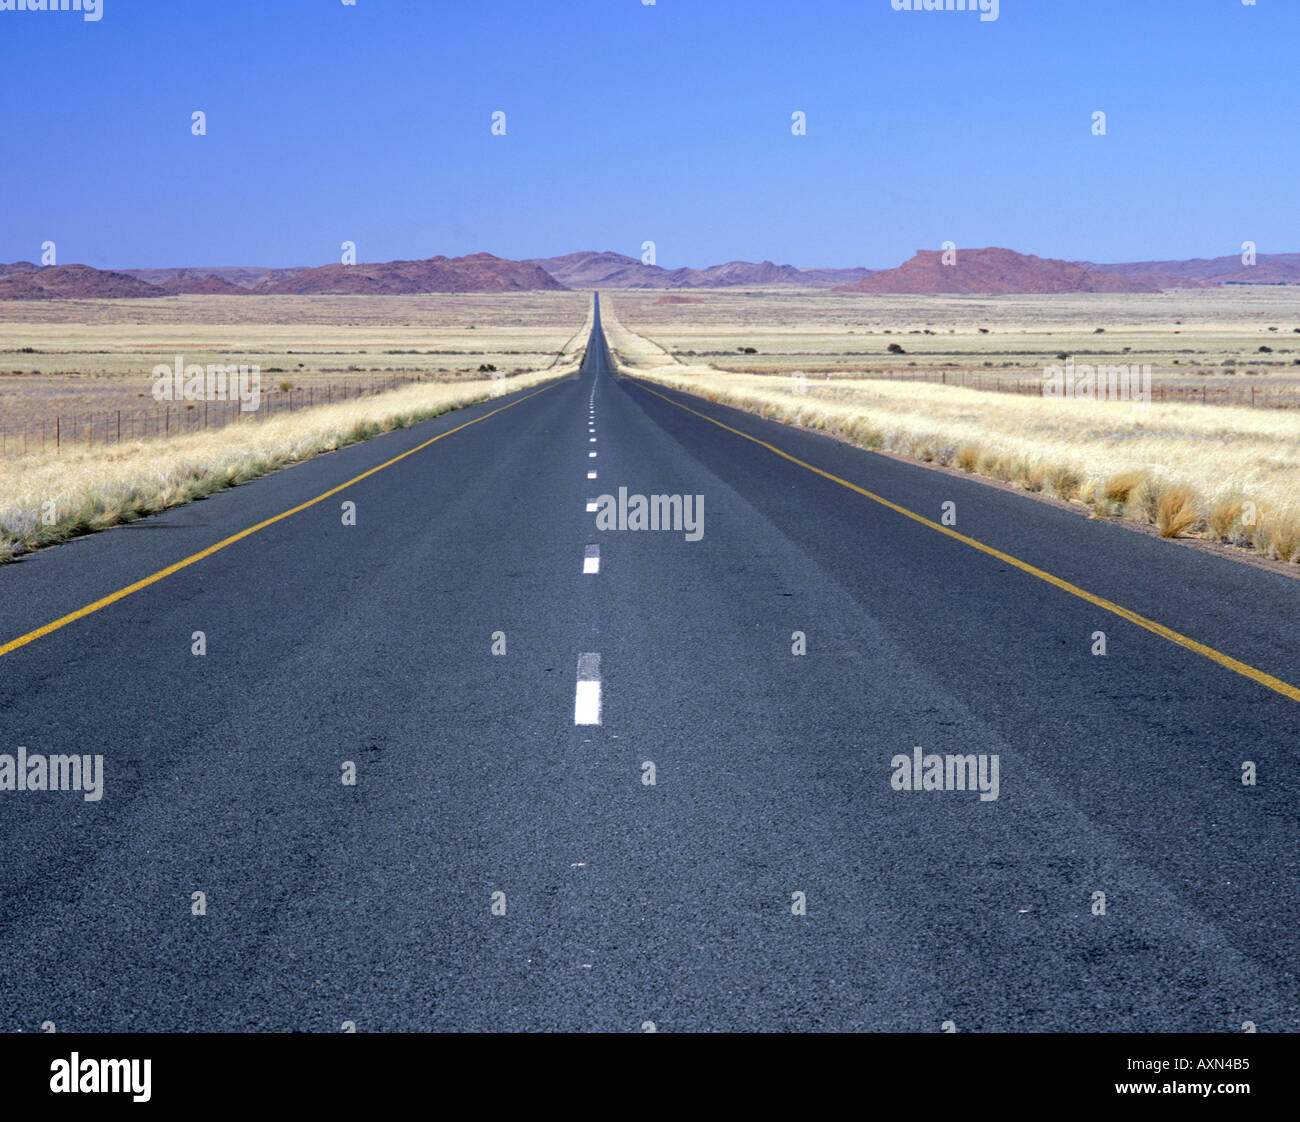 The N14 road in South Africa's Northern Cape province. Stock Photo